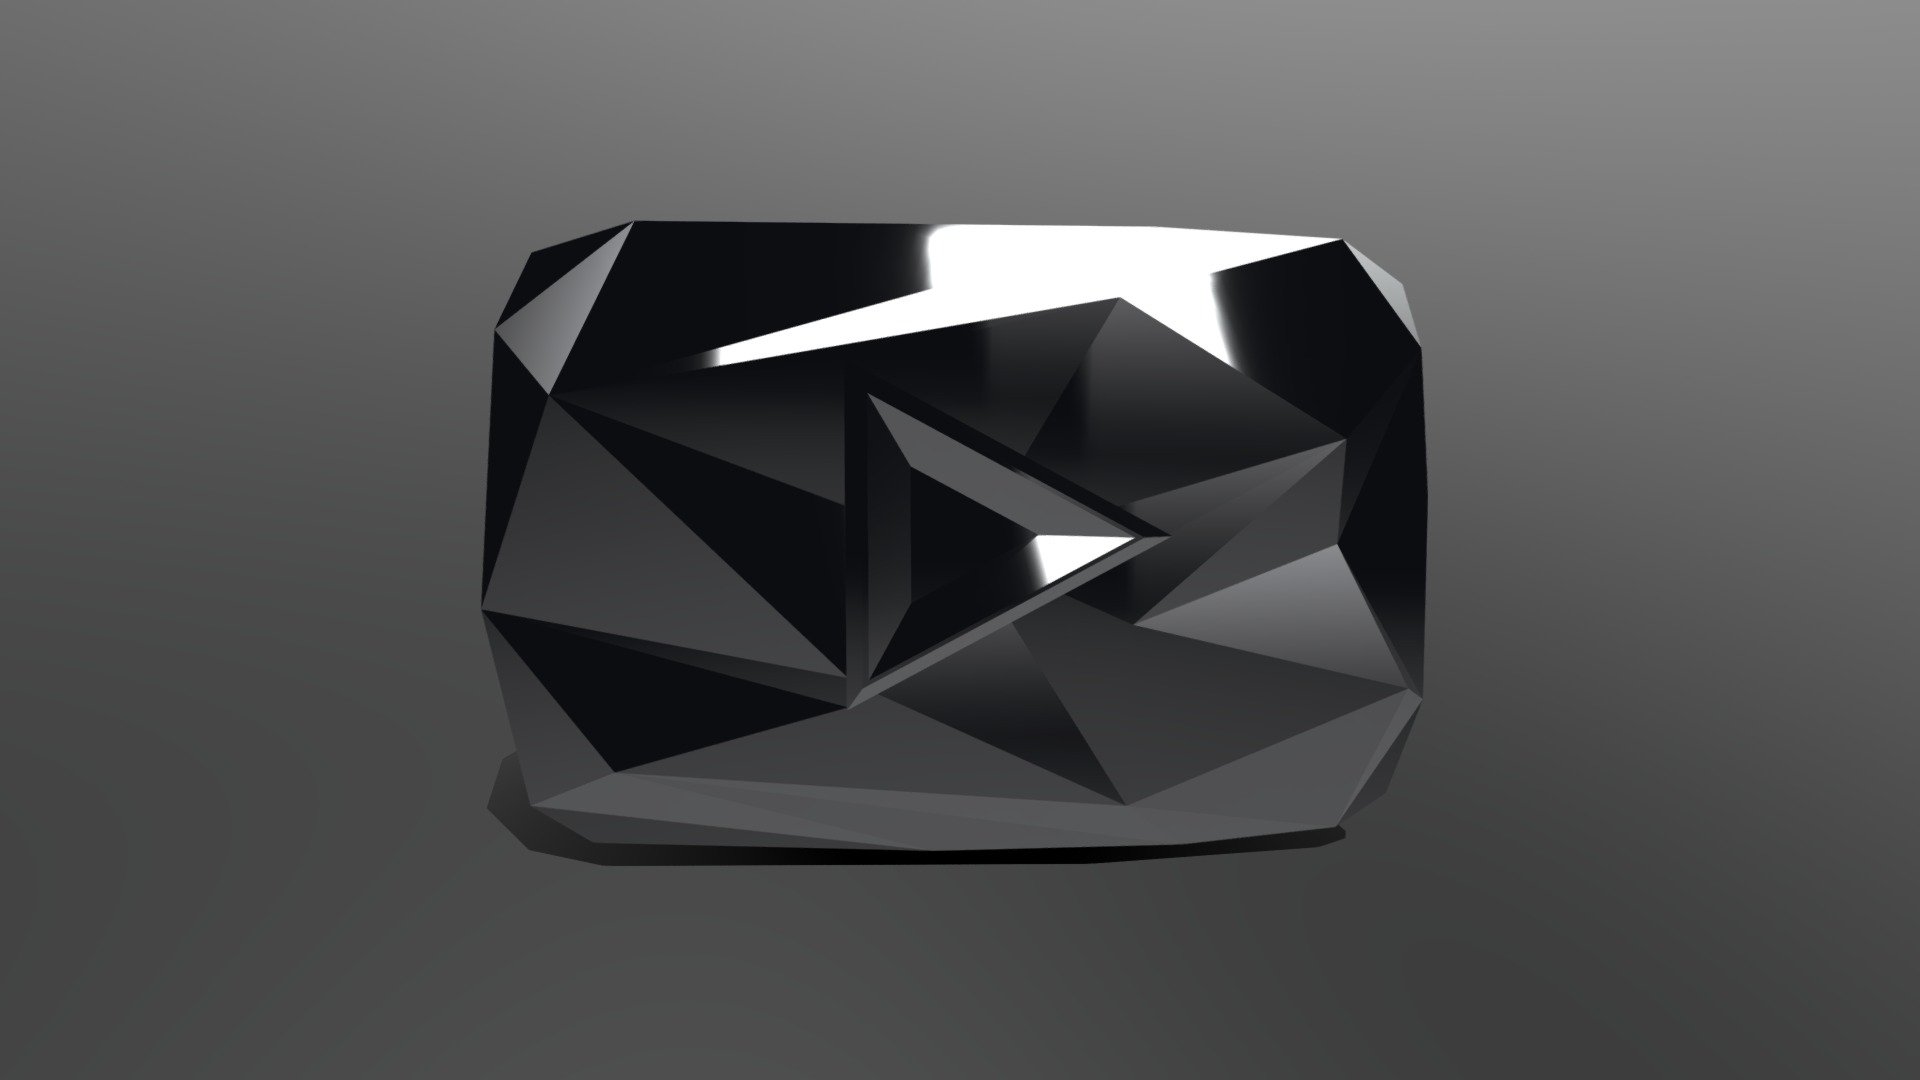 black youtube play button